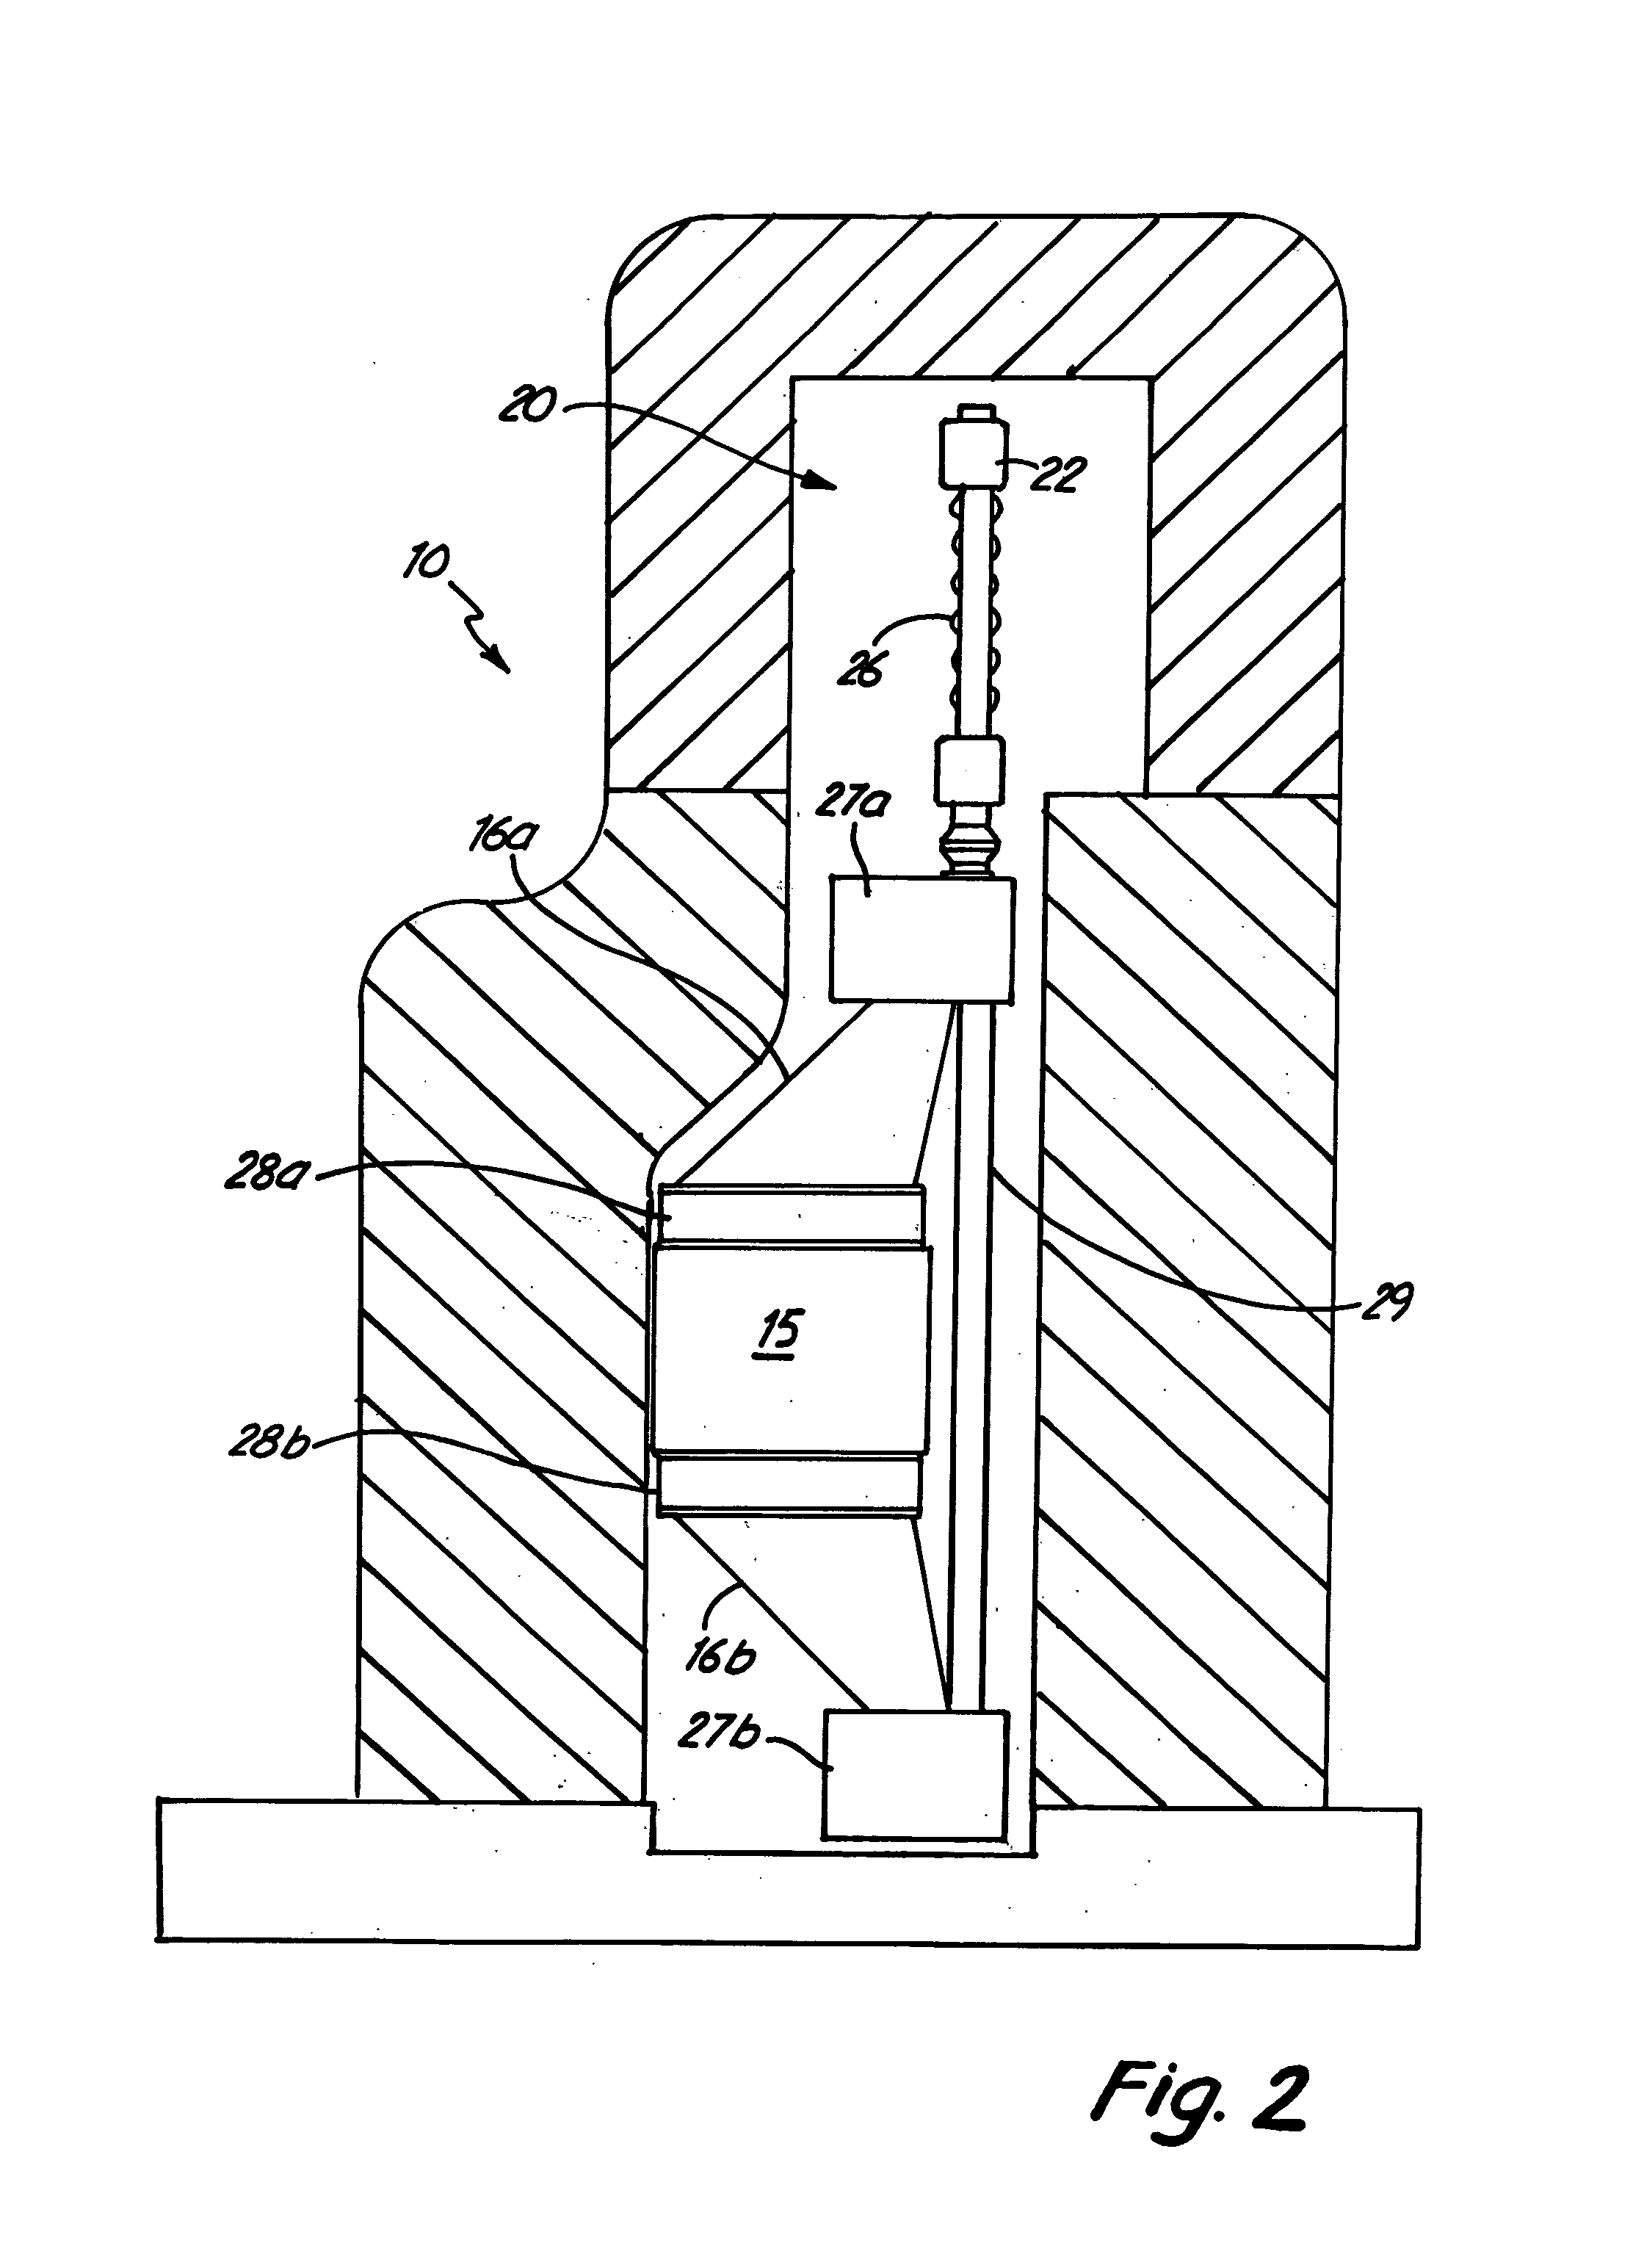 Method of providing extended shelf life fresh meat products